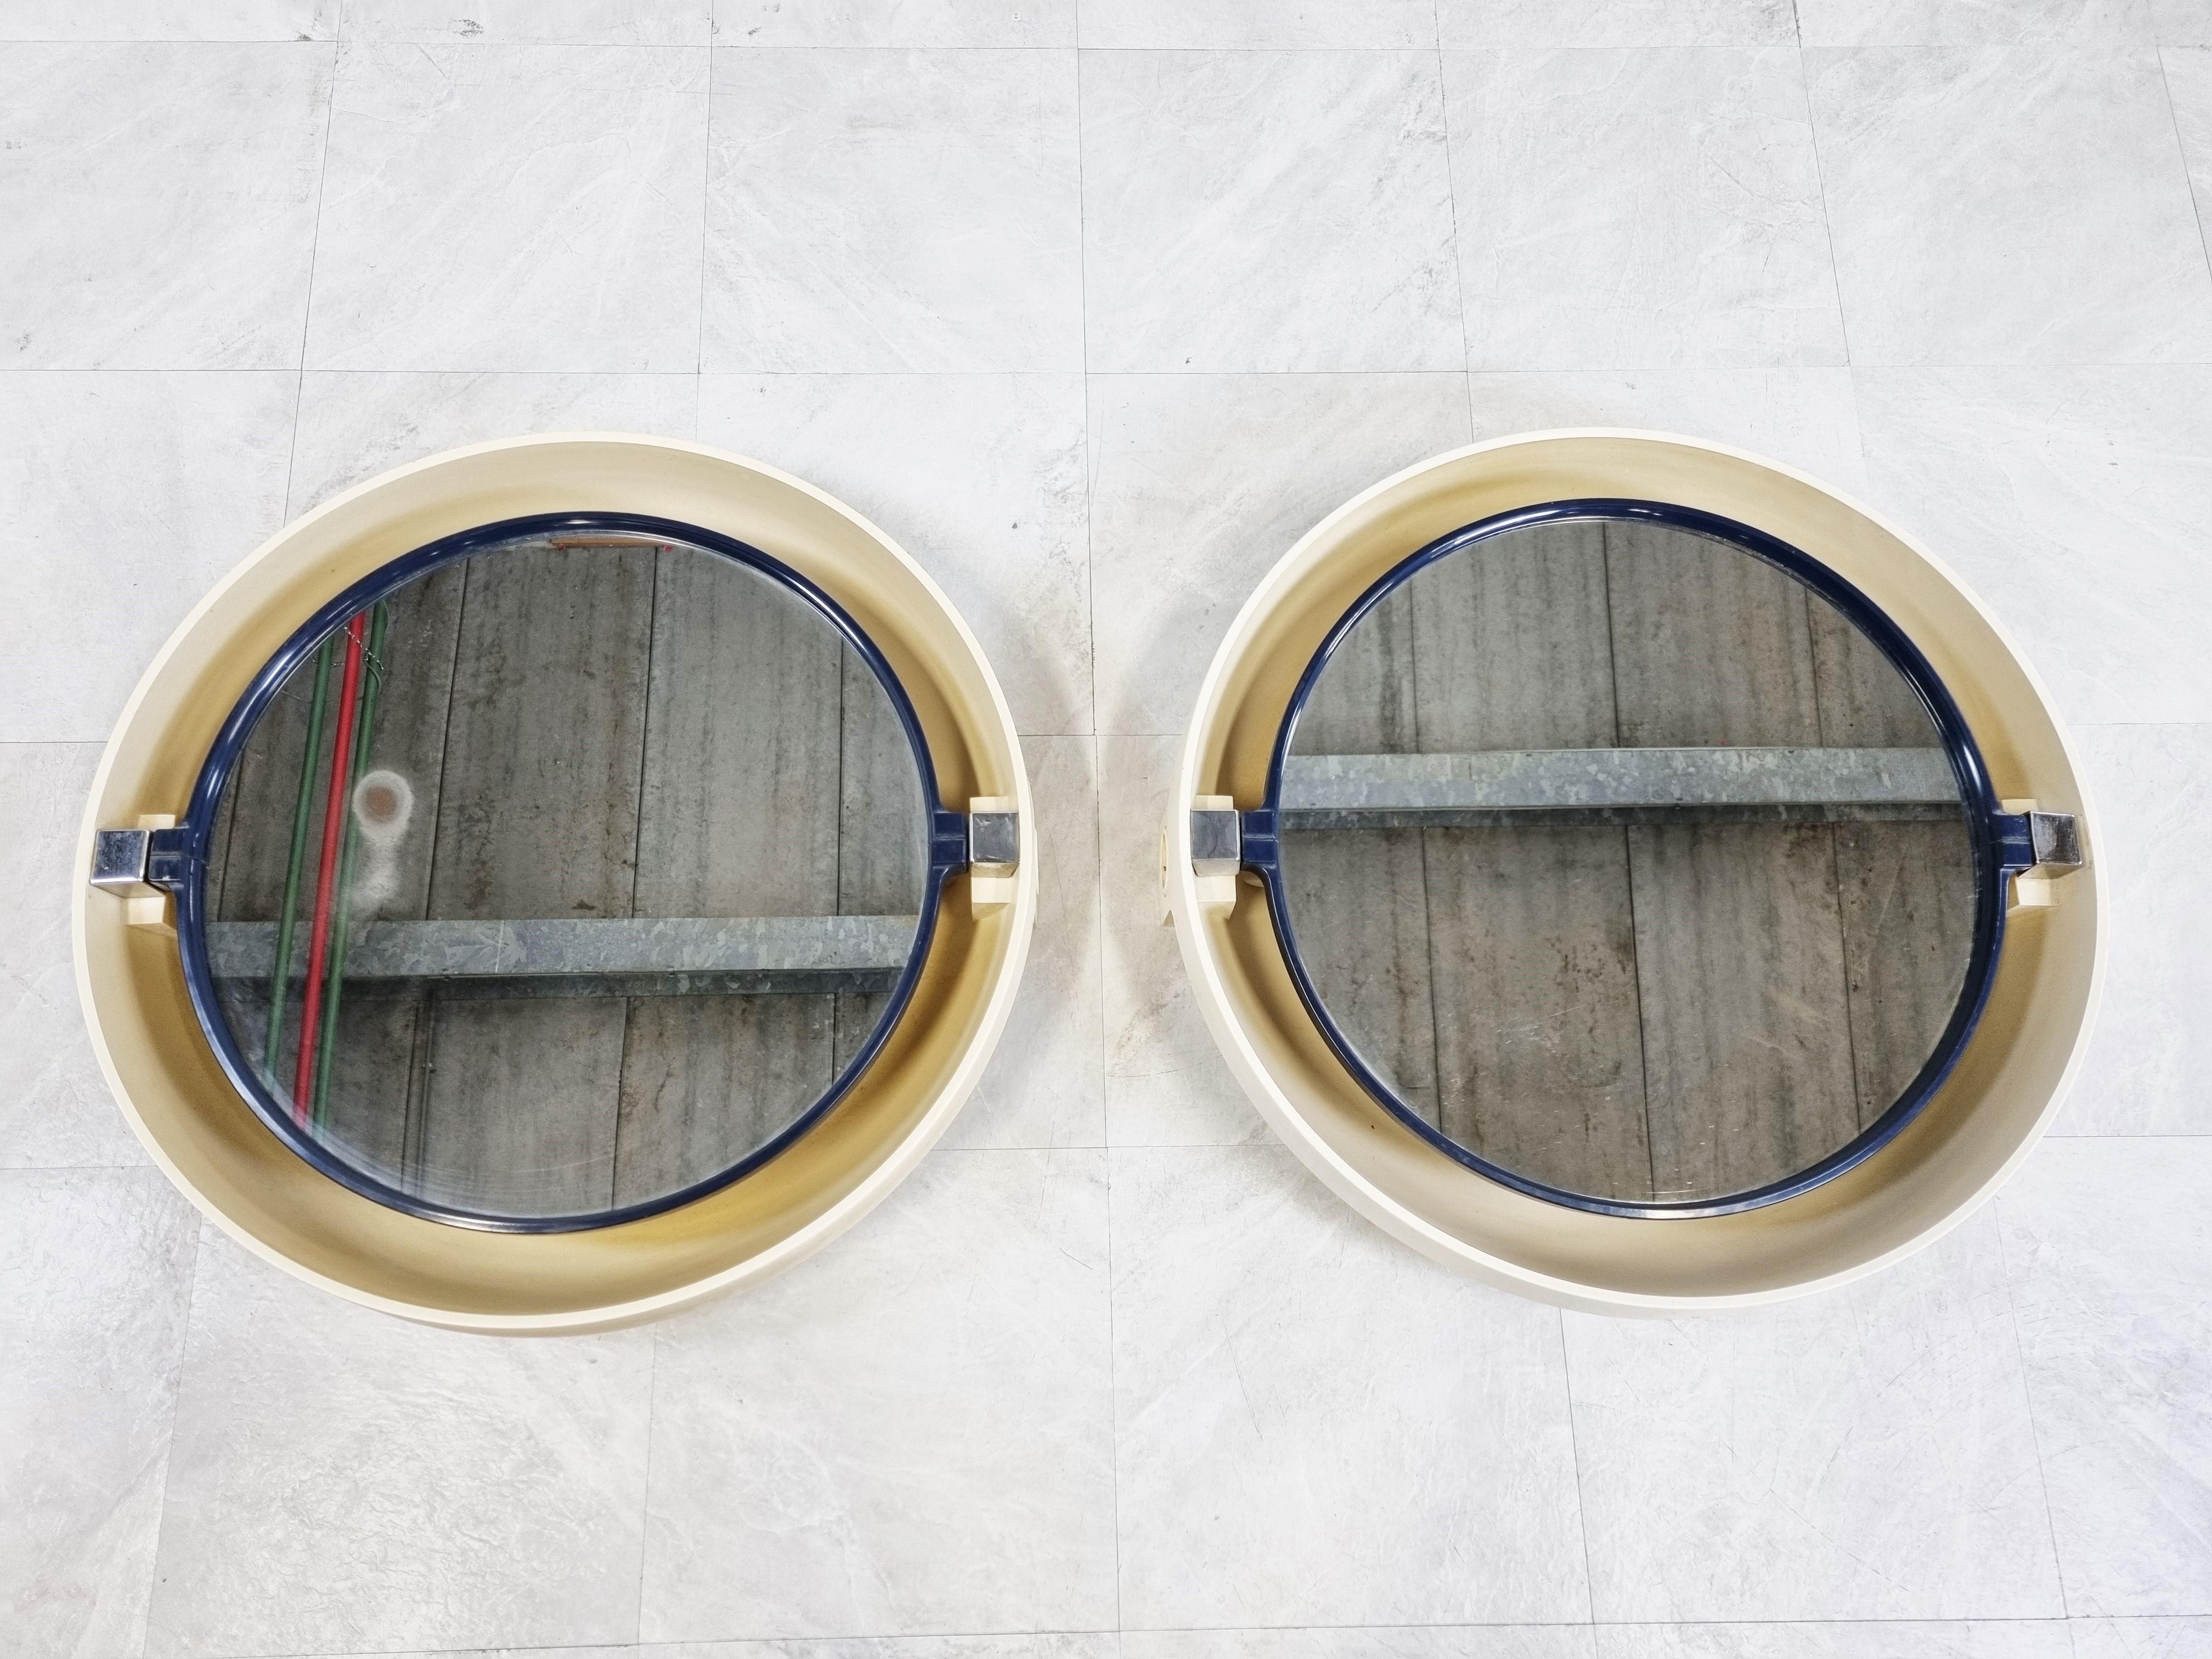 Pair of backlit space age design mirrors from the 1970s by Alibert.

They have a built in plug to use for bathroom appliances.

They come as a pair, ideal to decorate your bathroom.

One of the two mirrors has a slightly worn glass, which adds